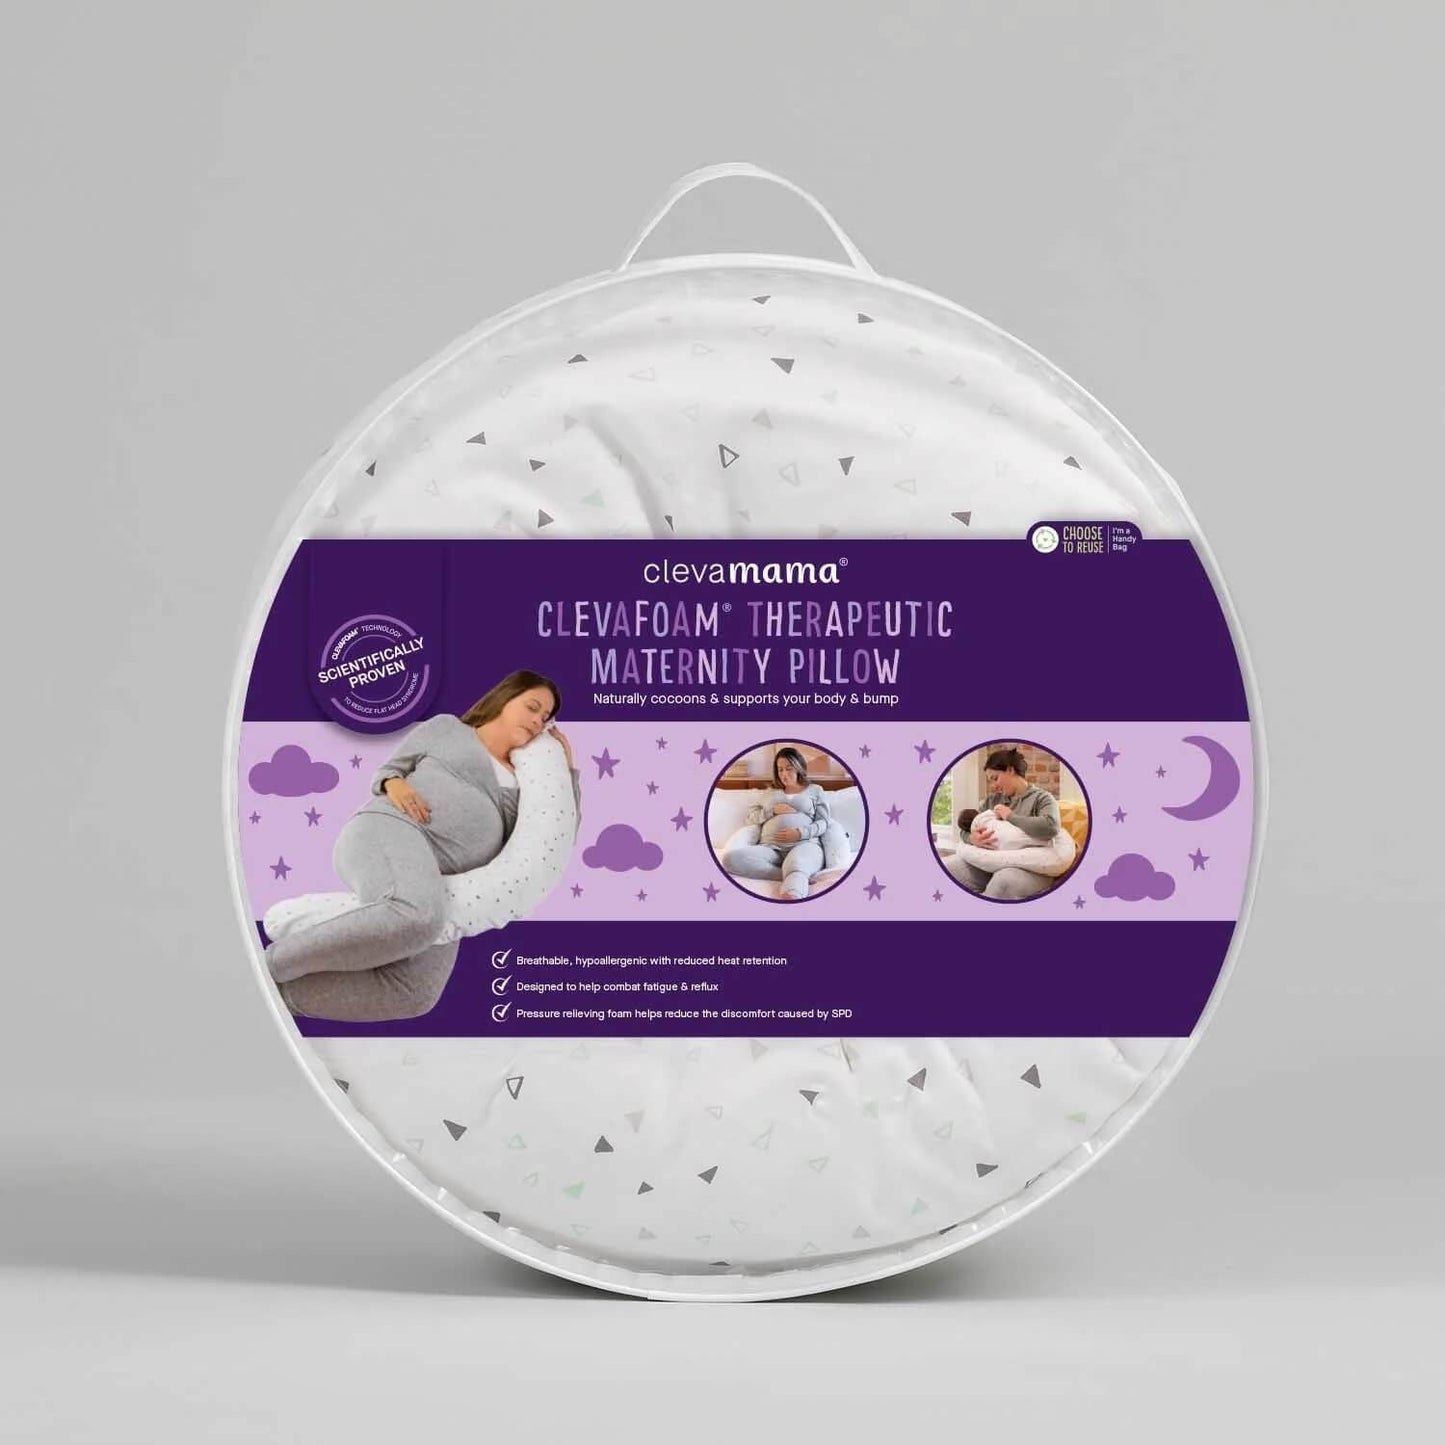 Clevamama ClevaFoam® Therapeutic Maternity Pillow